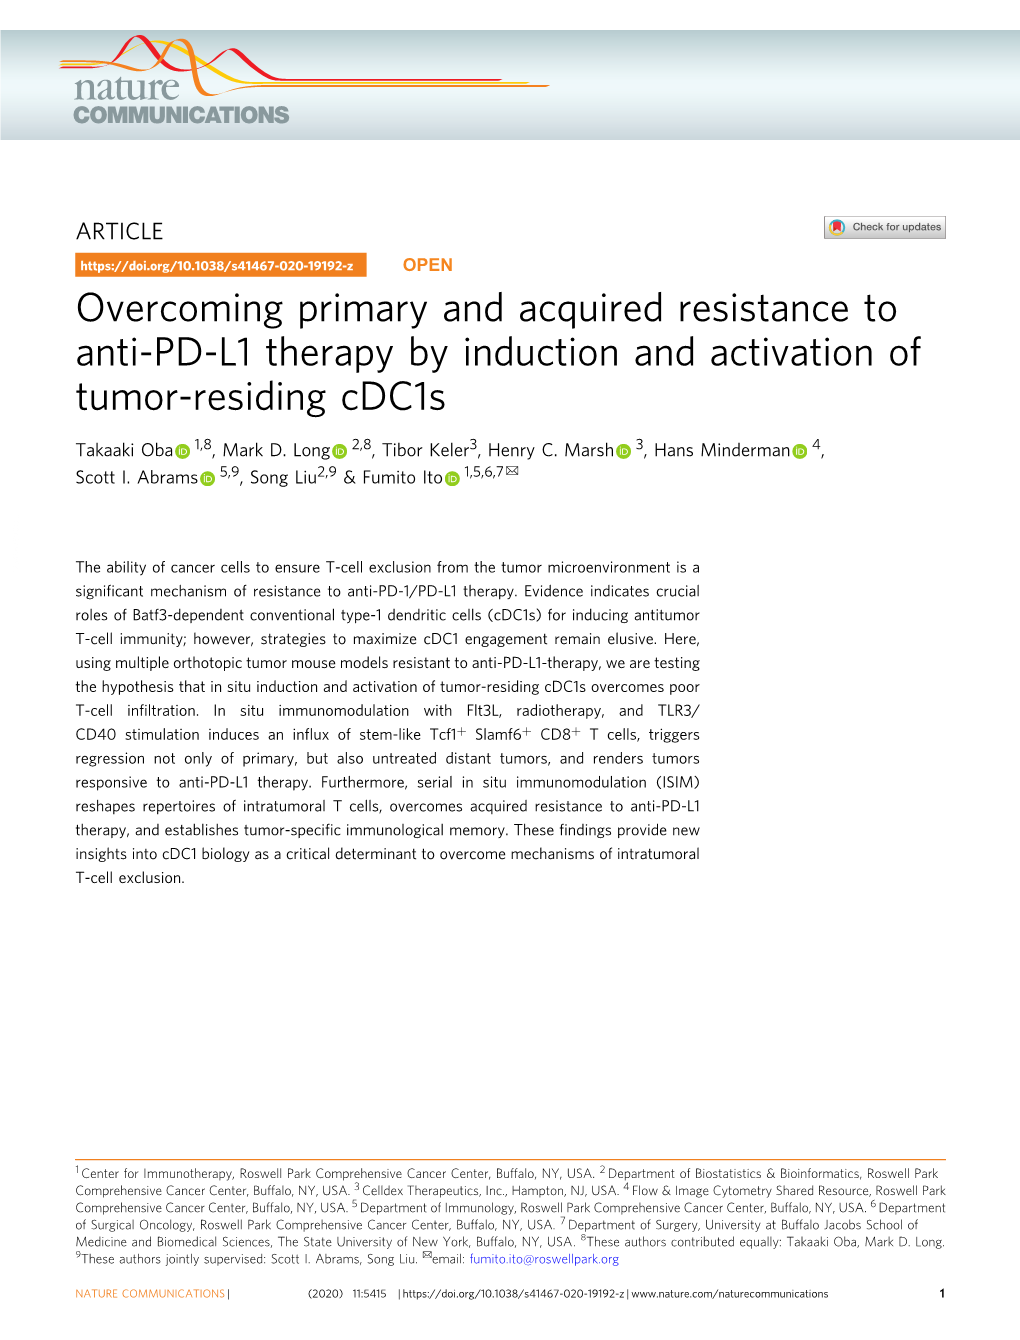 Overcoming Primary and Acquired Resistance to Anti-PD-L1 Therapy by Induction and Activation of Tumor-Residing Cdc1s